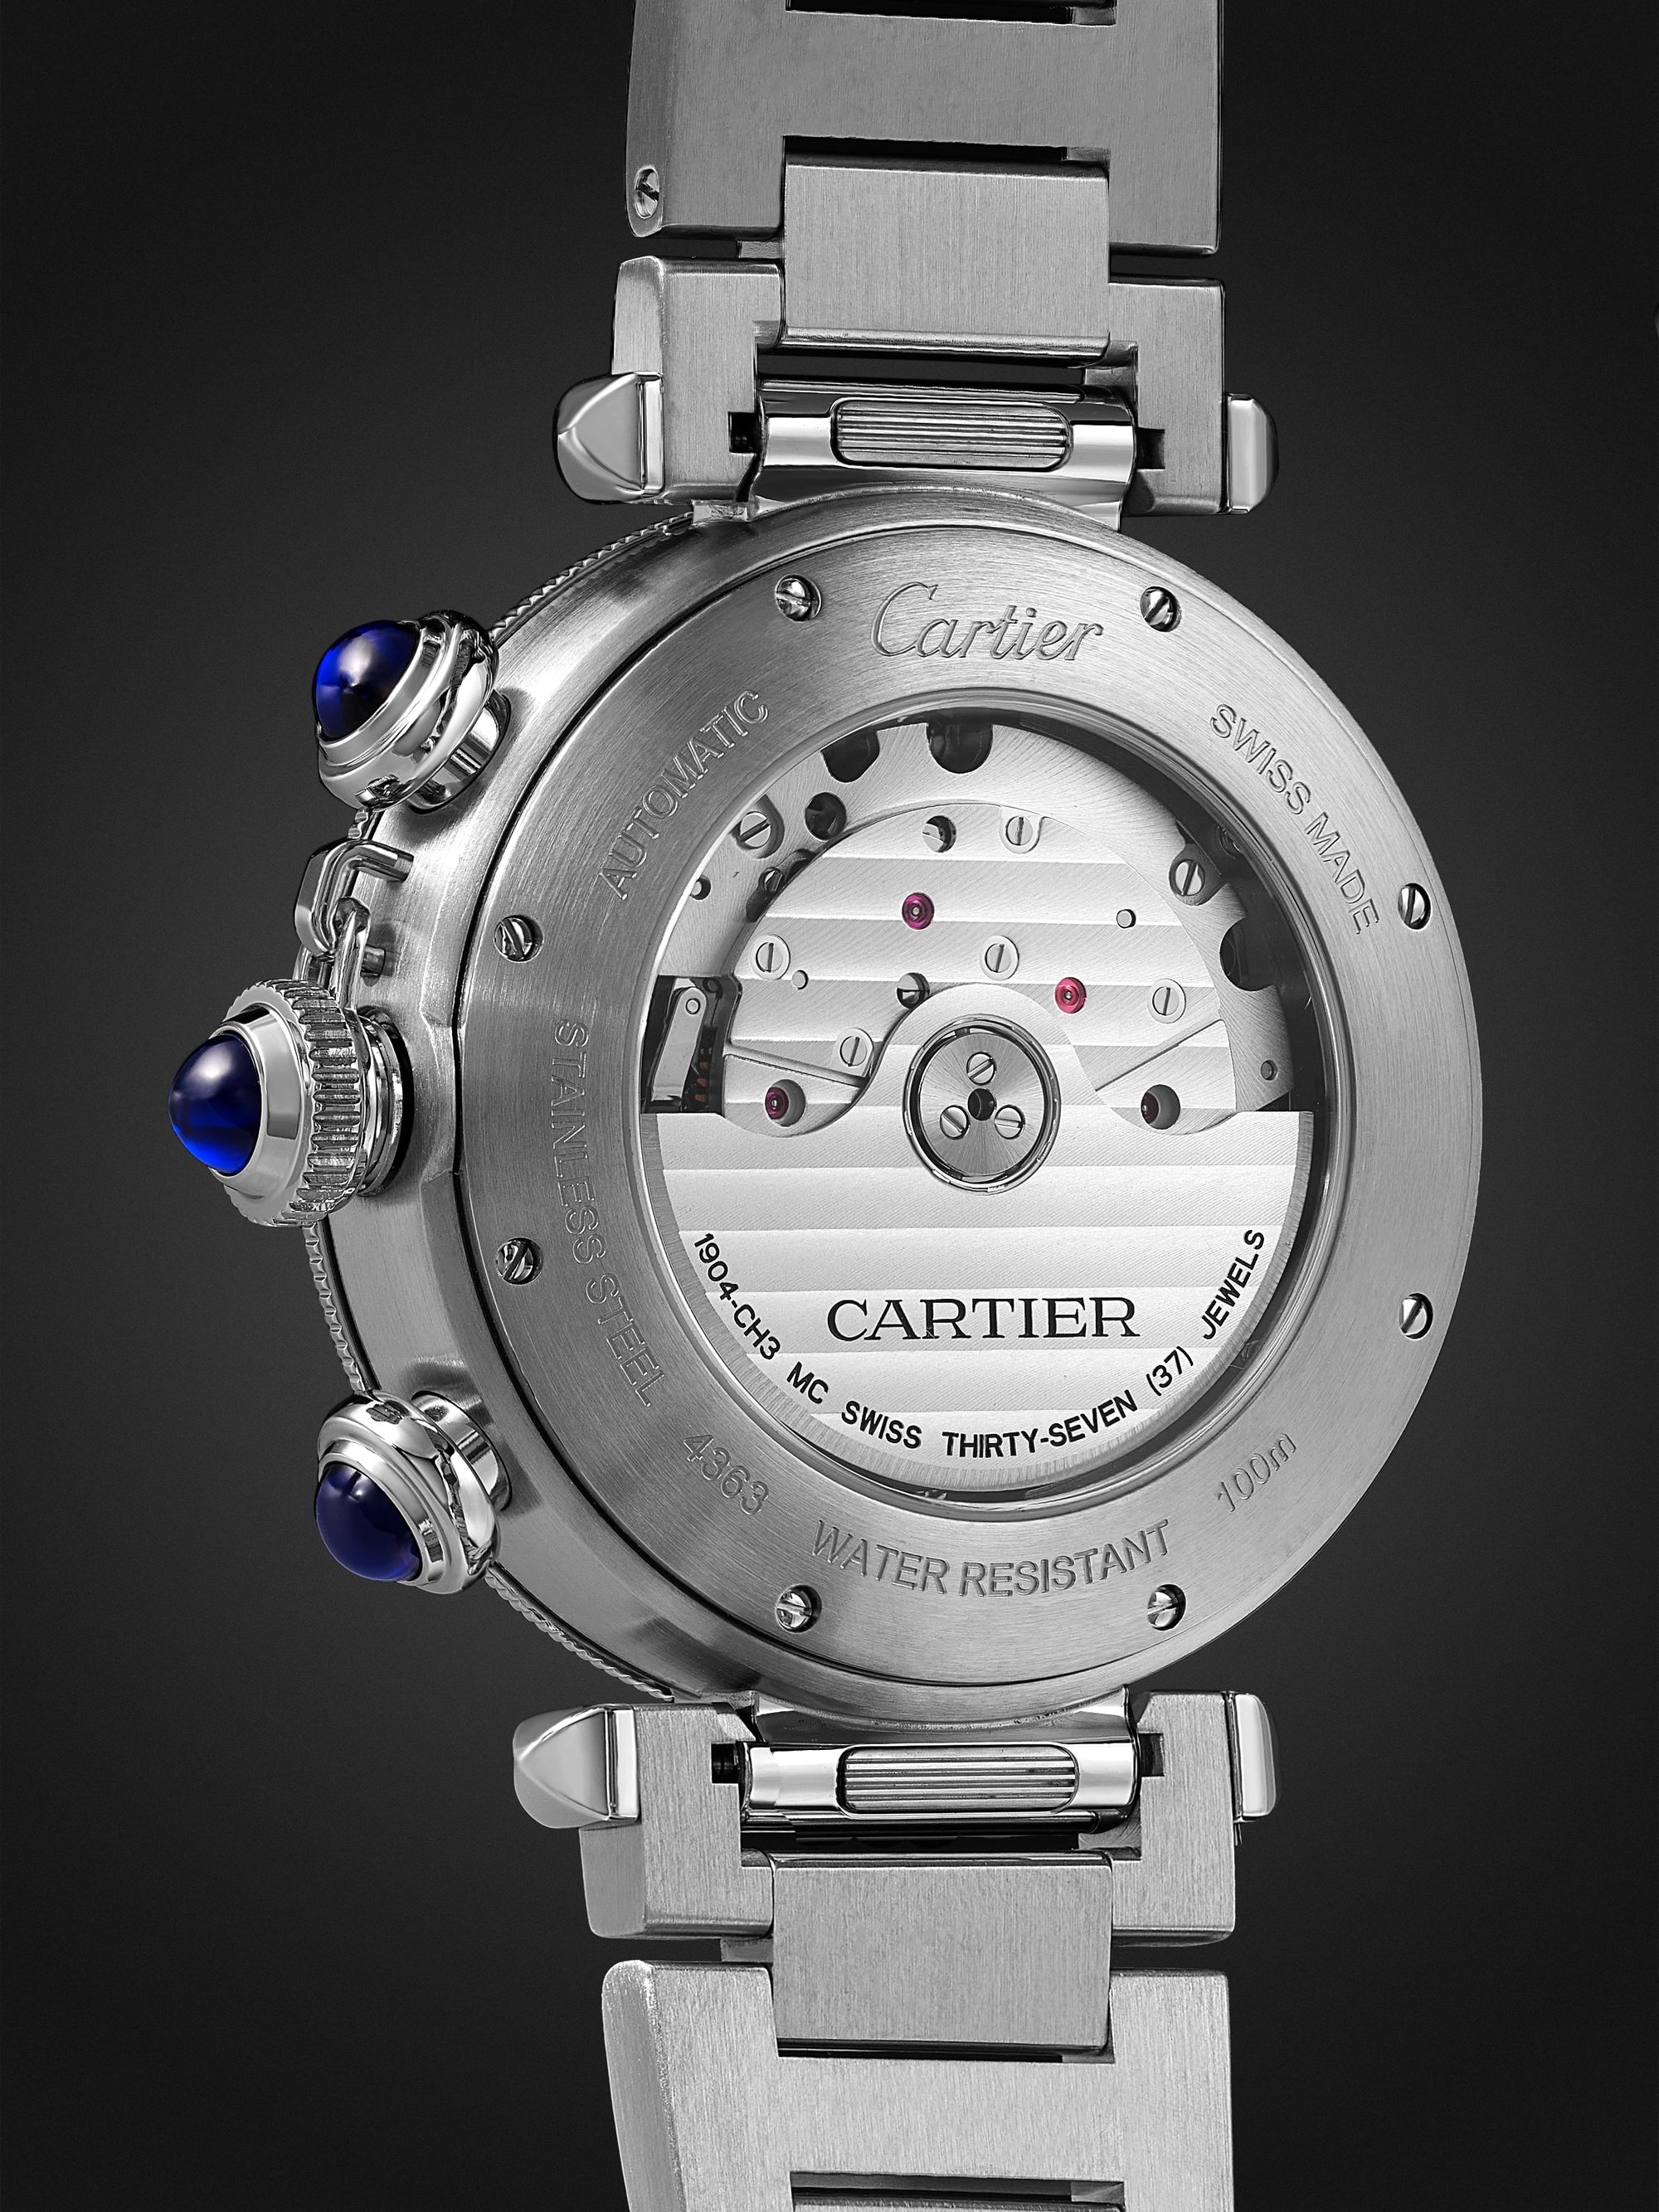 CARTIER Pasha de Cartier Automatic Chronograph 41mm Stainless Steel Watch, Ref. No. WSPA0027